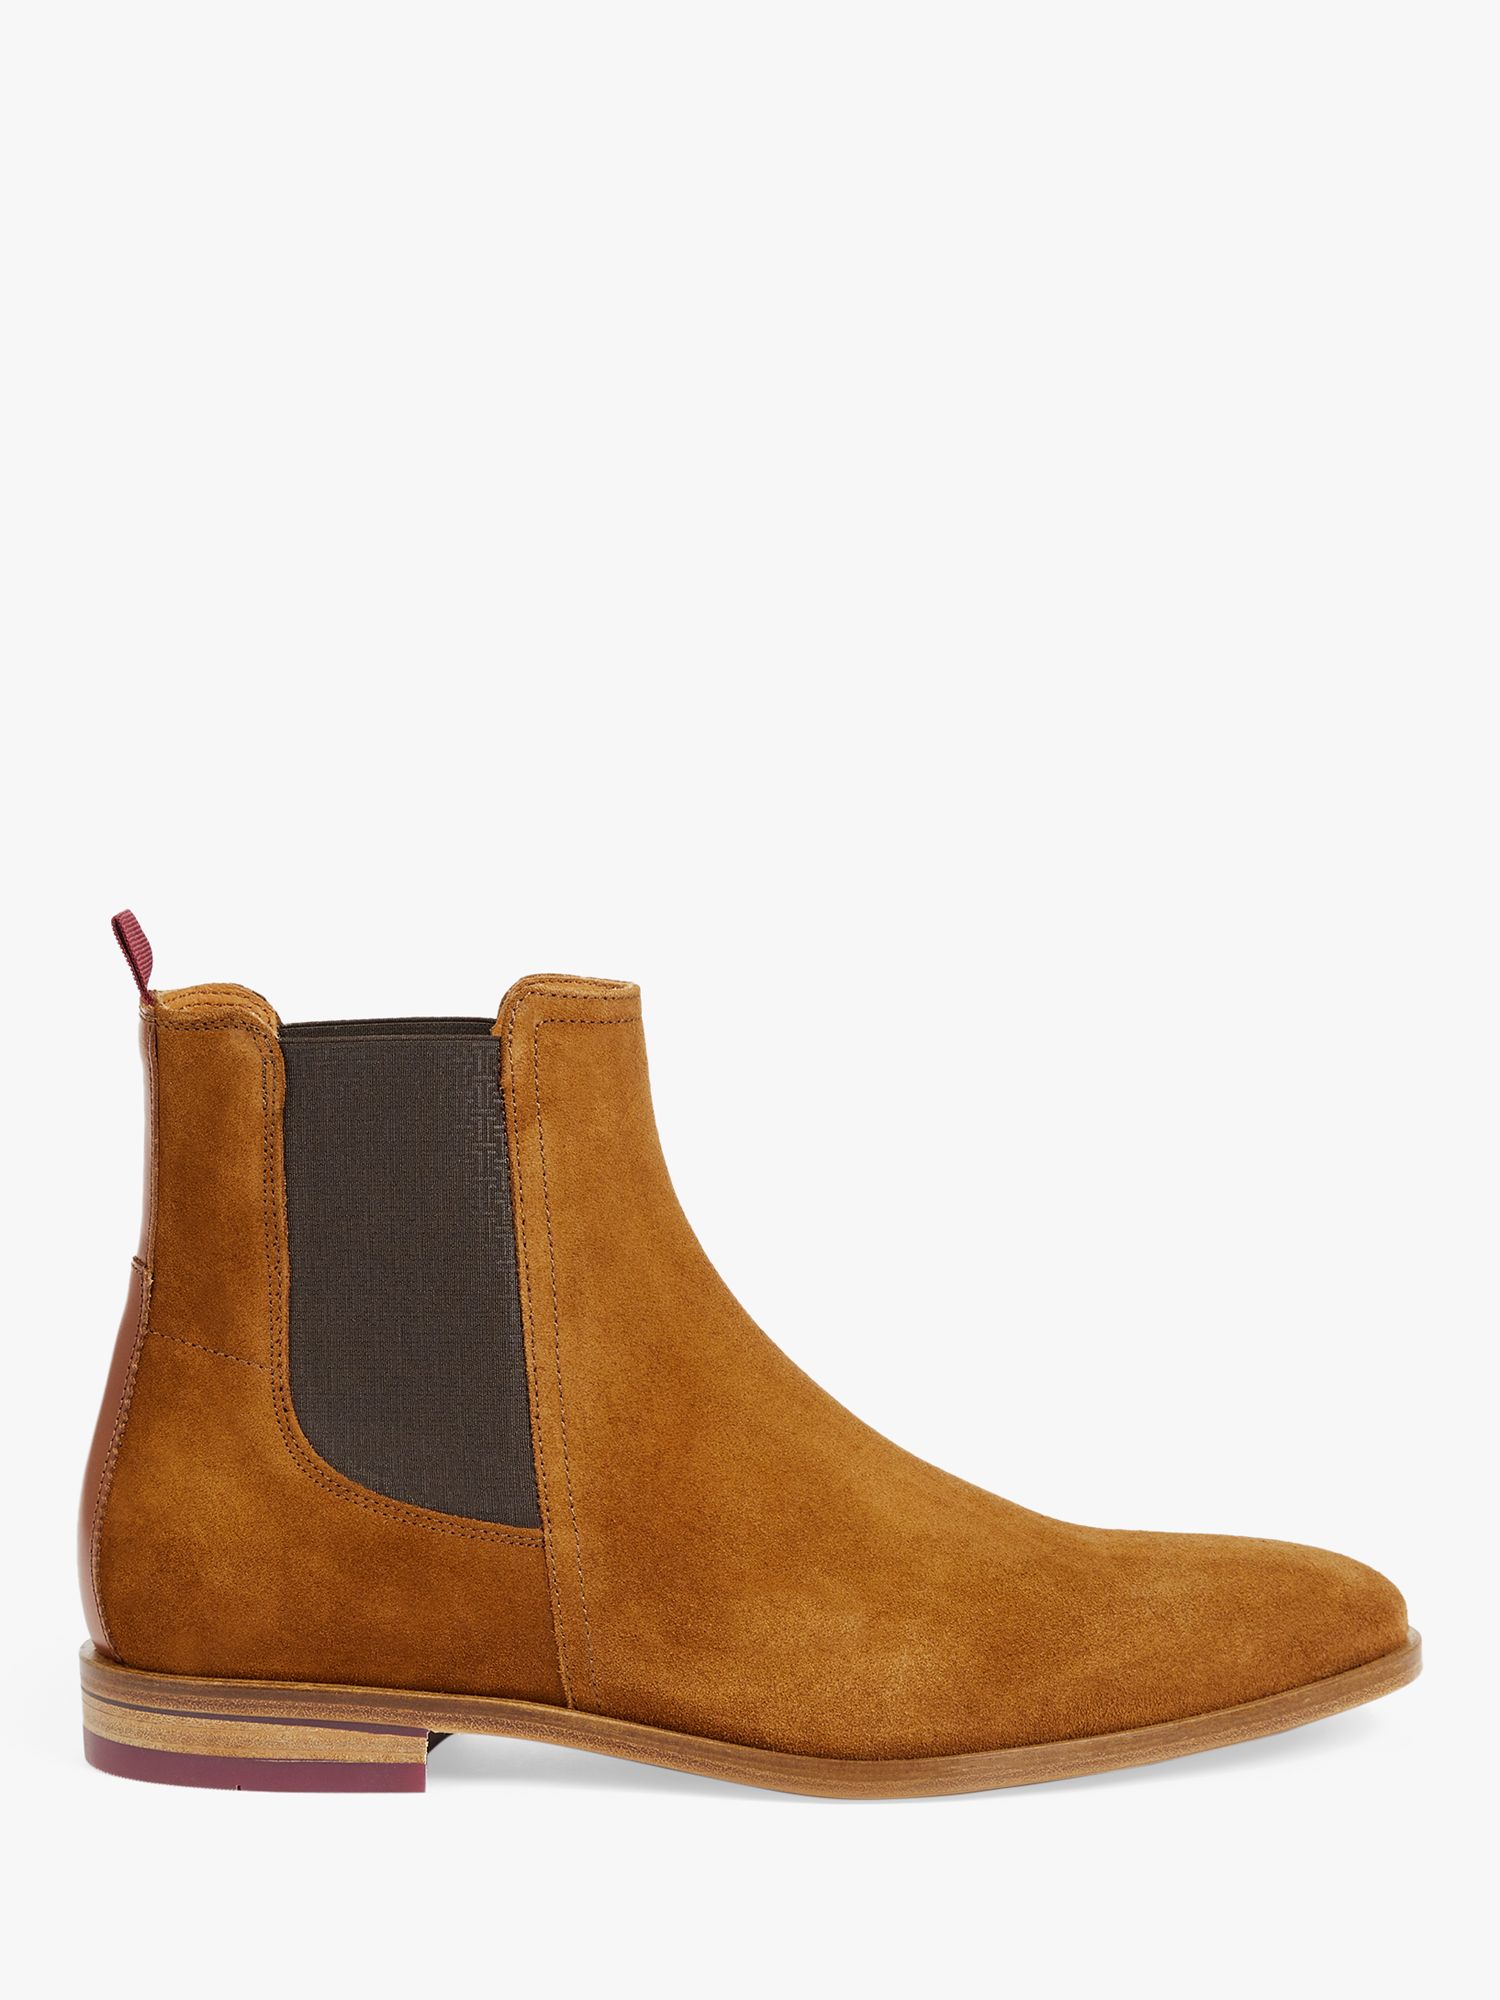 Ted Baker Ficus Suede Chelsea Boots, Dark Tan at John Lewis & Partners